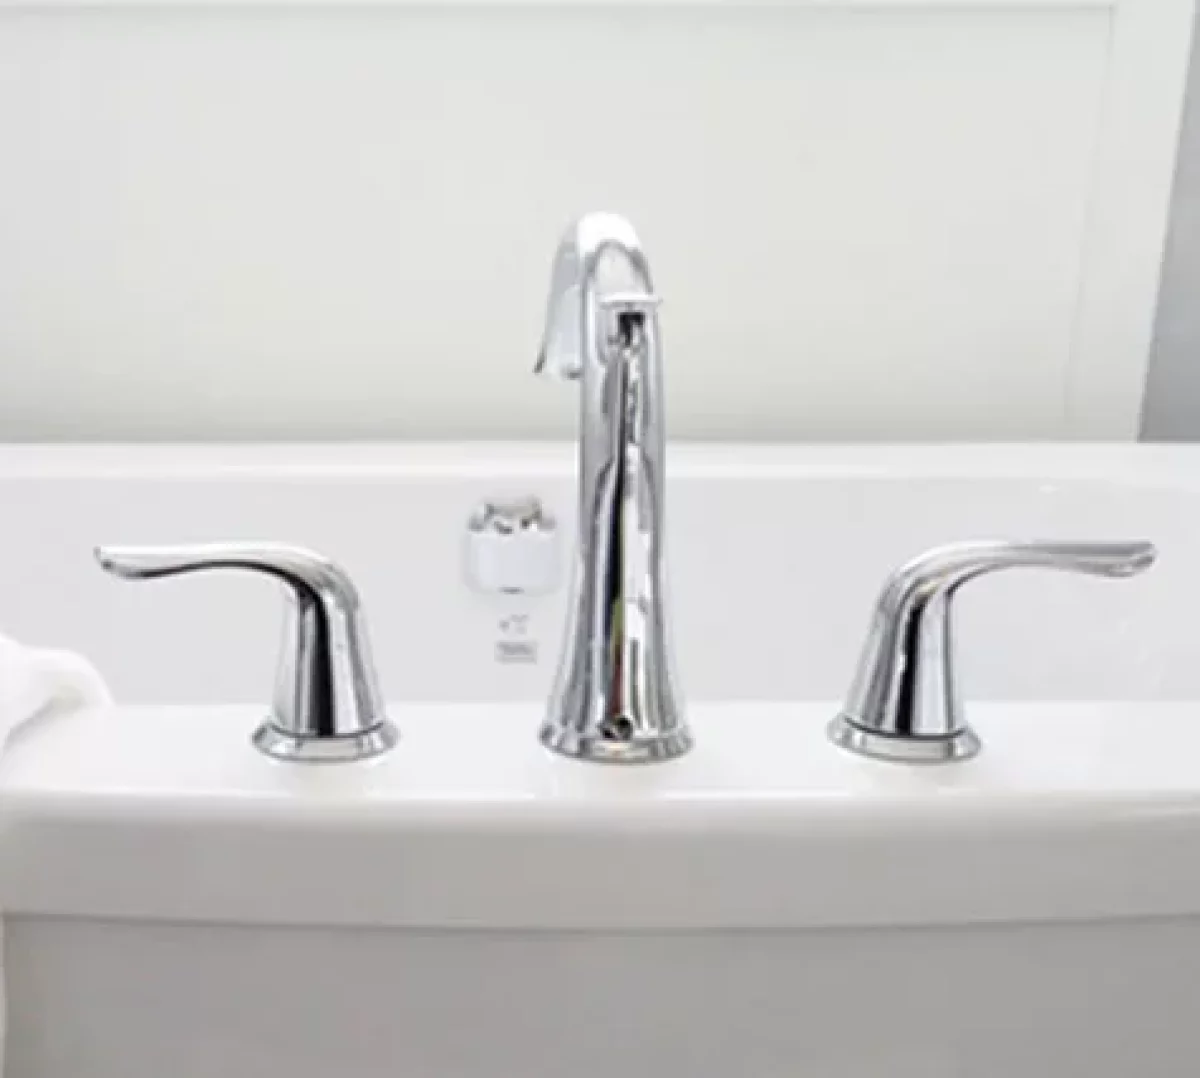 https://plymouthplumbers.com/wp-content/uploads/2023/09/new-Fixtures-and-Faucets-1200x1078.webp